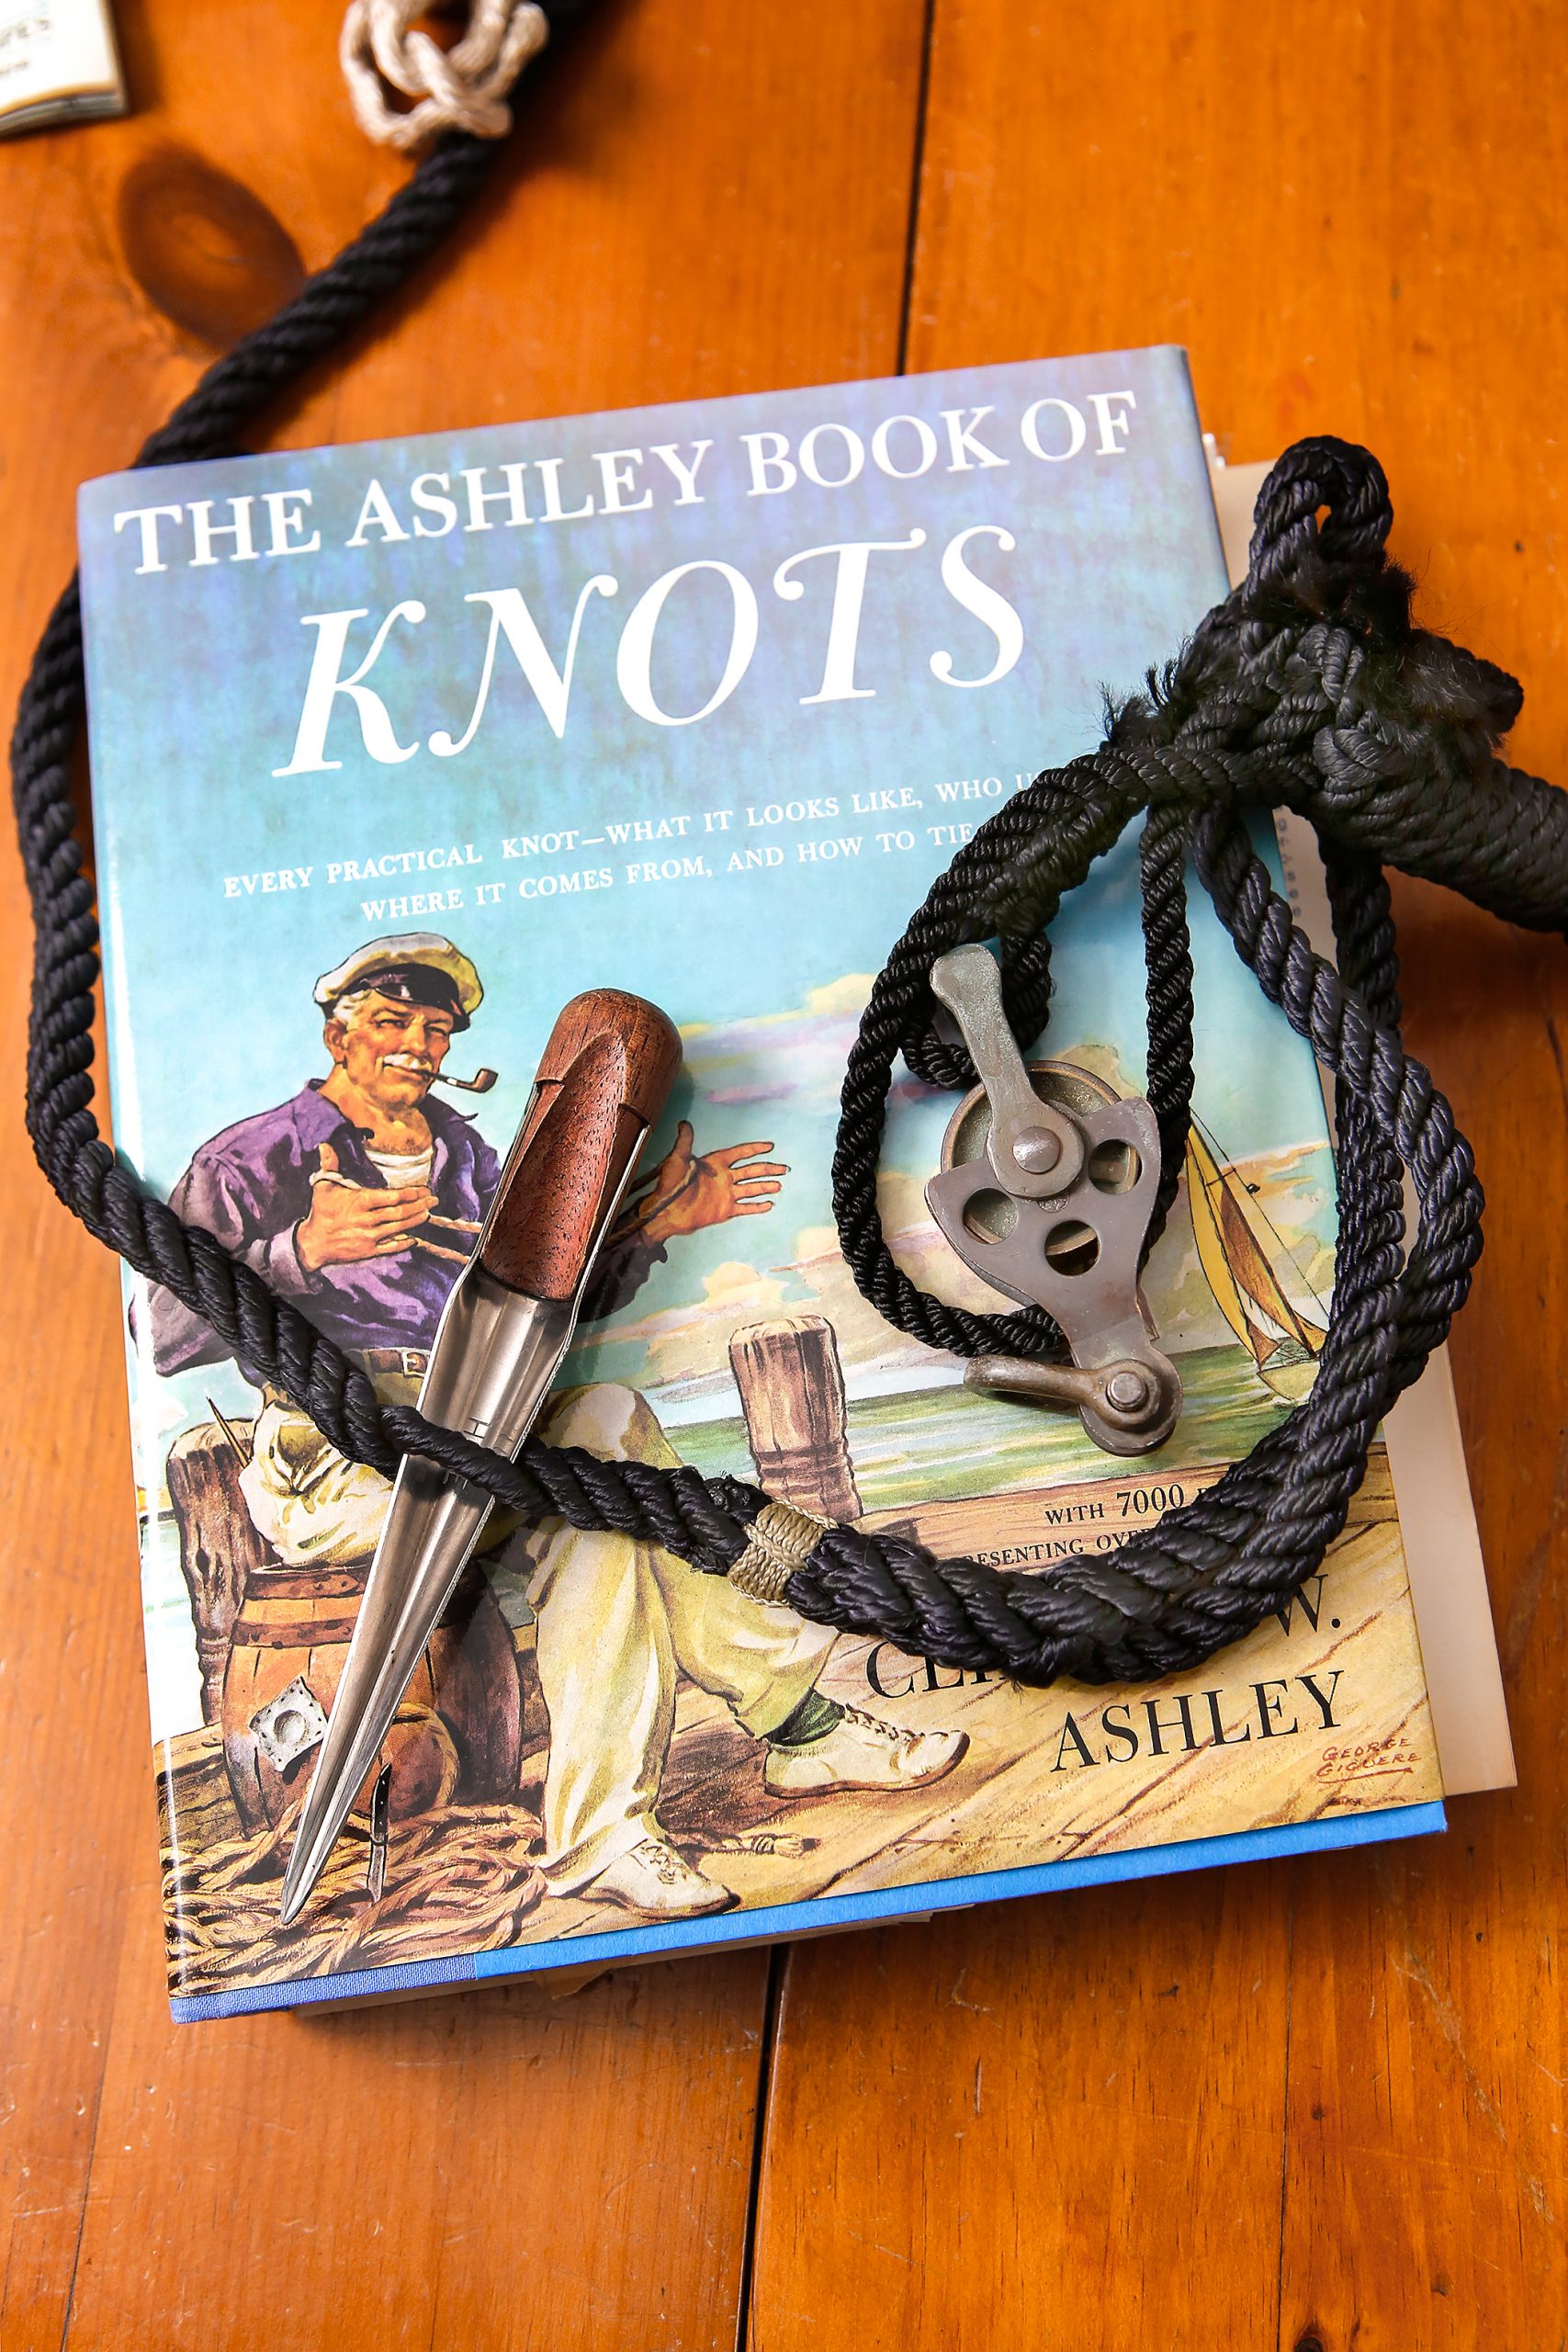 Recommending The Ashley Book of Knots, Tom has a knowledge of knots and cordage that is as diverse as it is magnetically fascinating. 